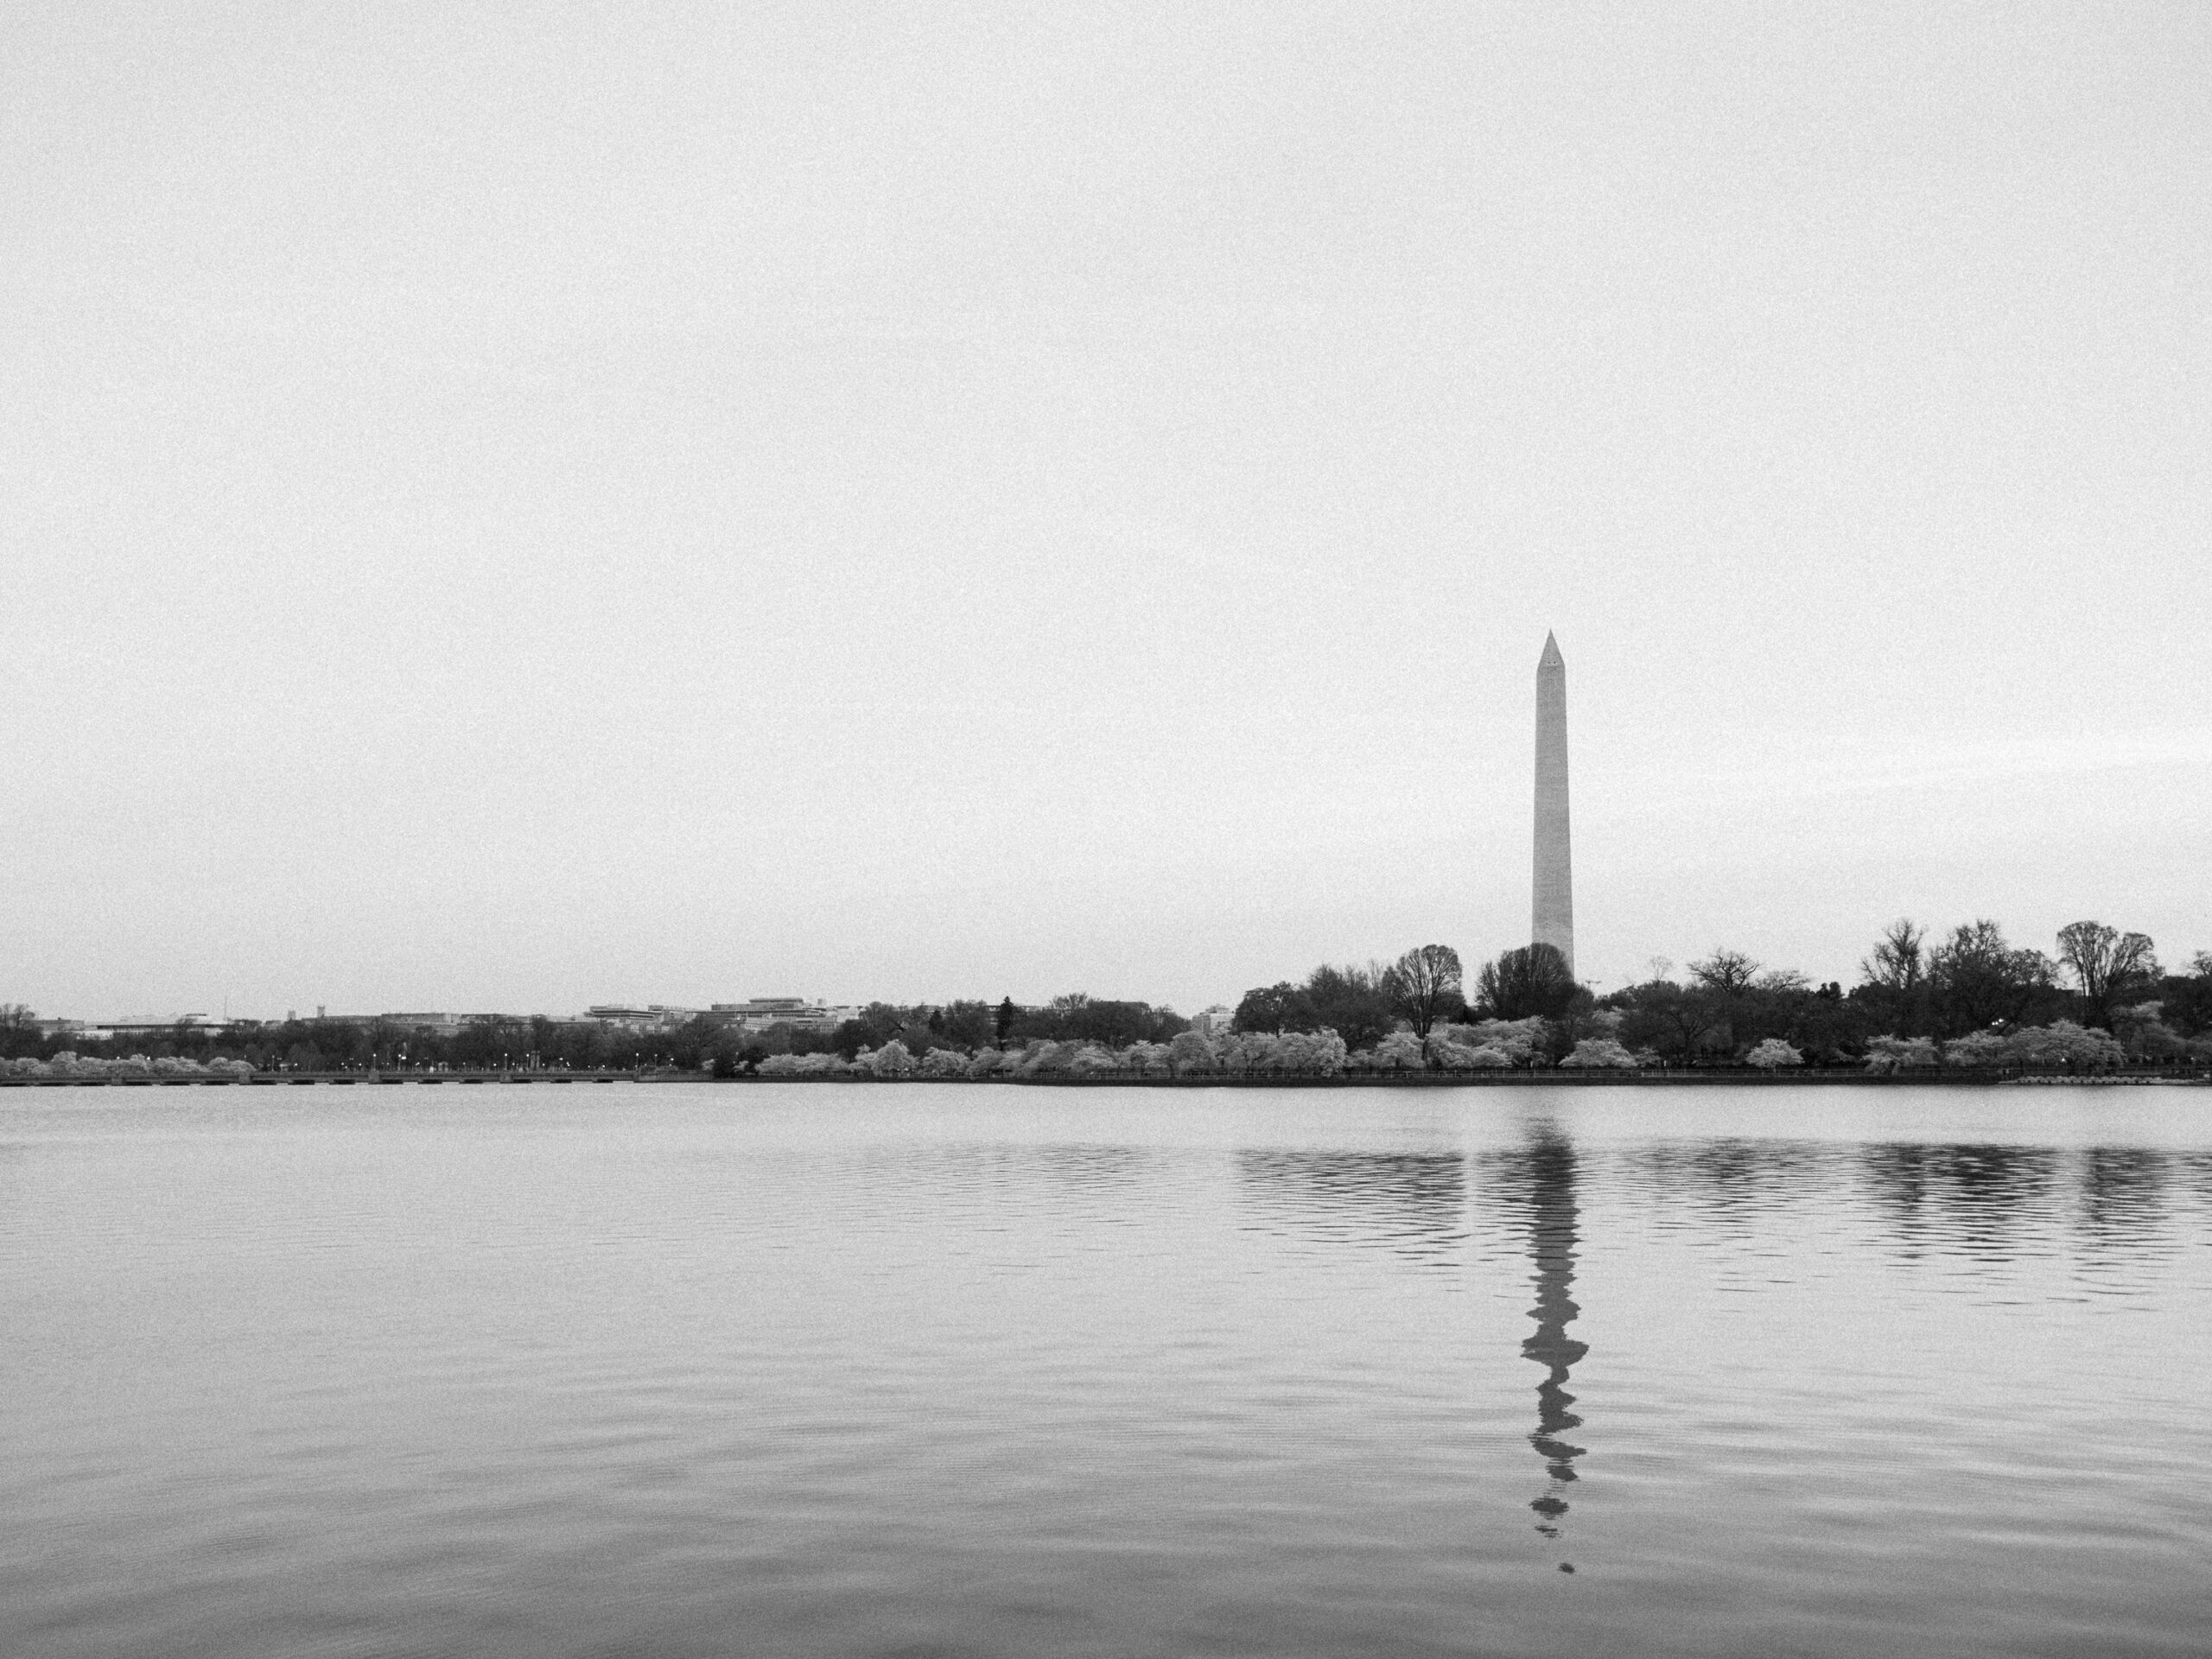 The washington monument during the cerry blossom bloom.